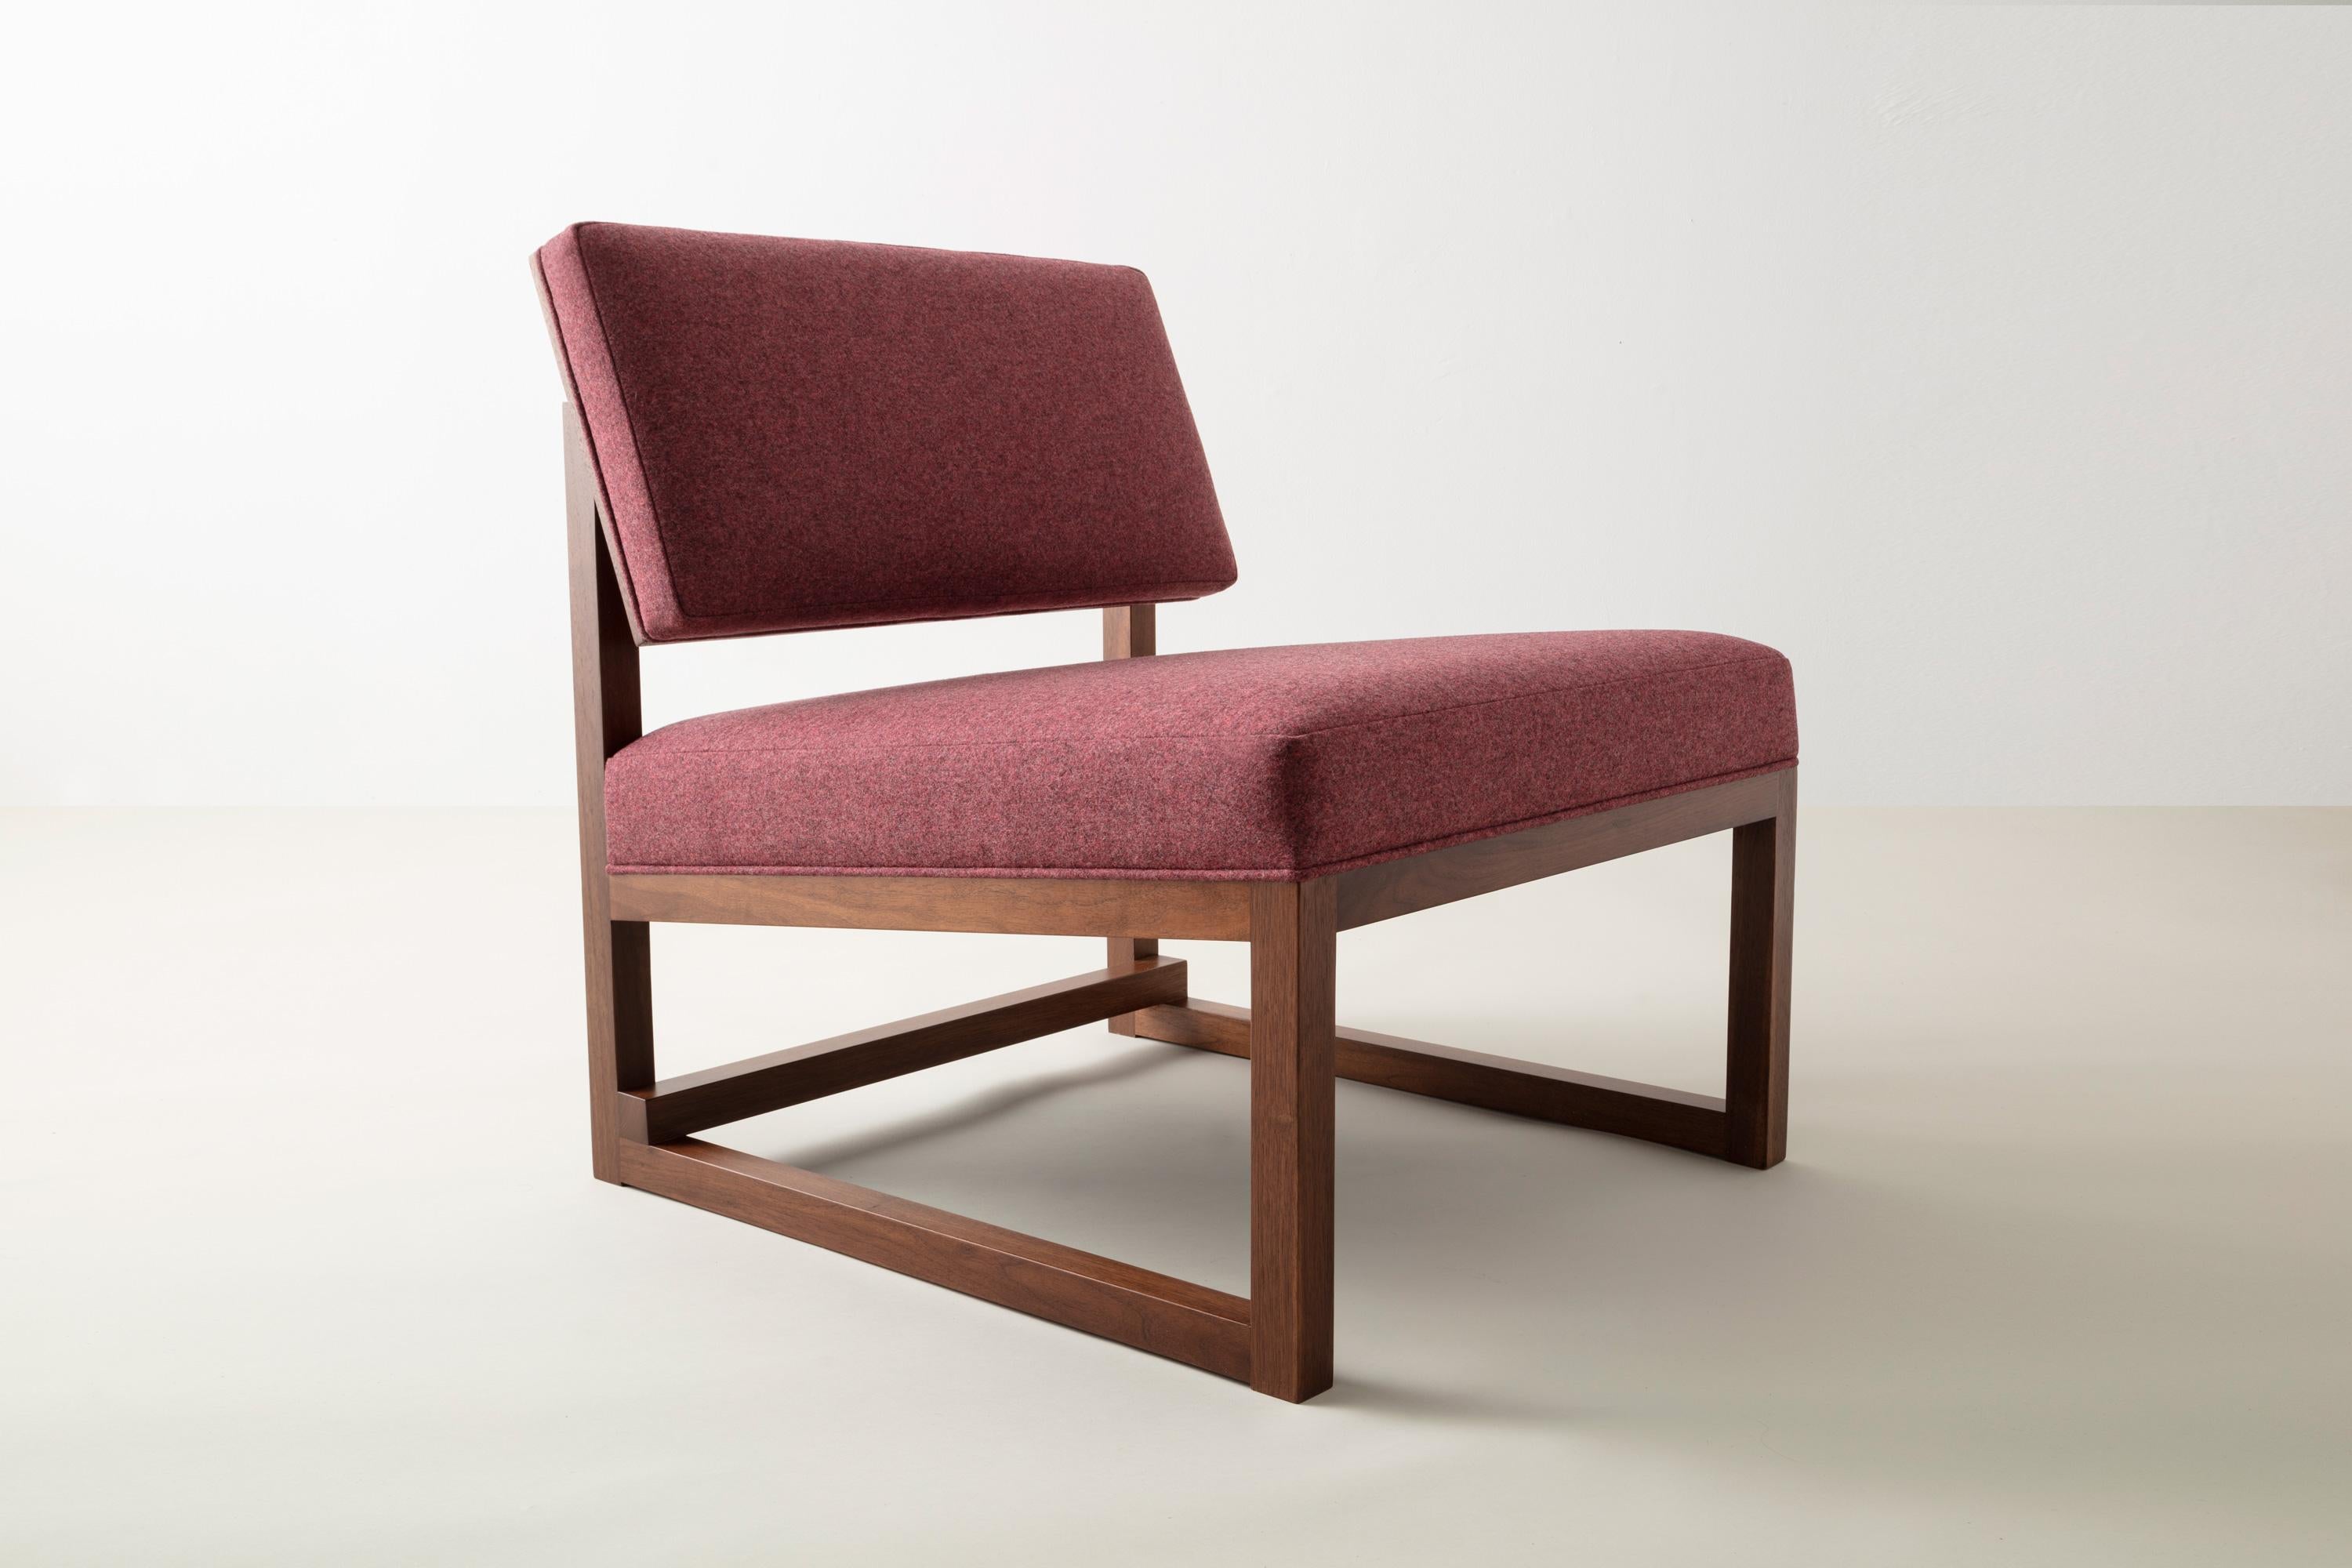 Hand-Crafted SQ Lounge Chair, solid wood, upholstery in felt, bouclé, or COM, handmade in USA